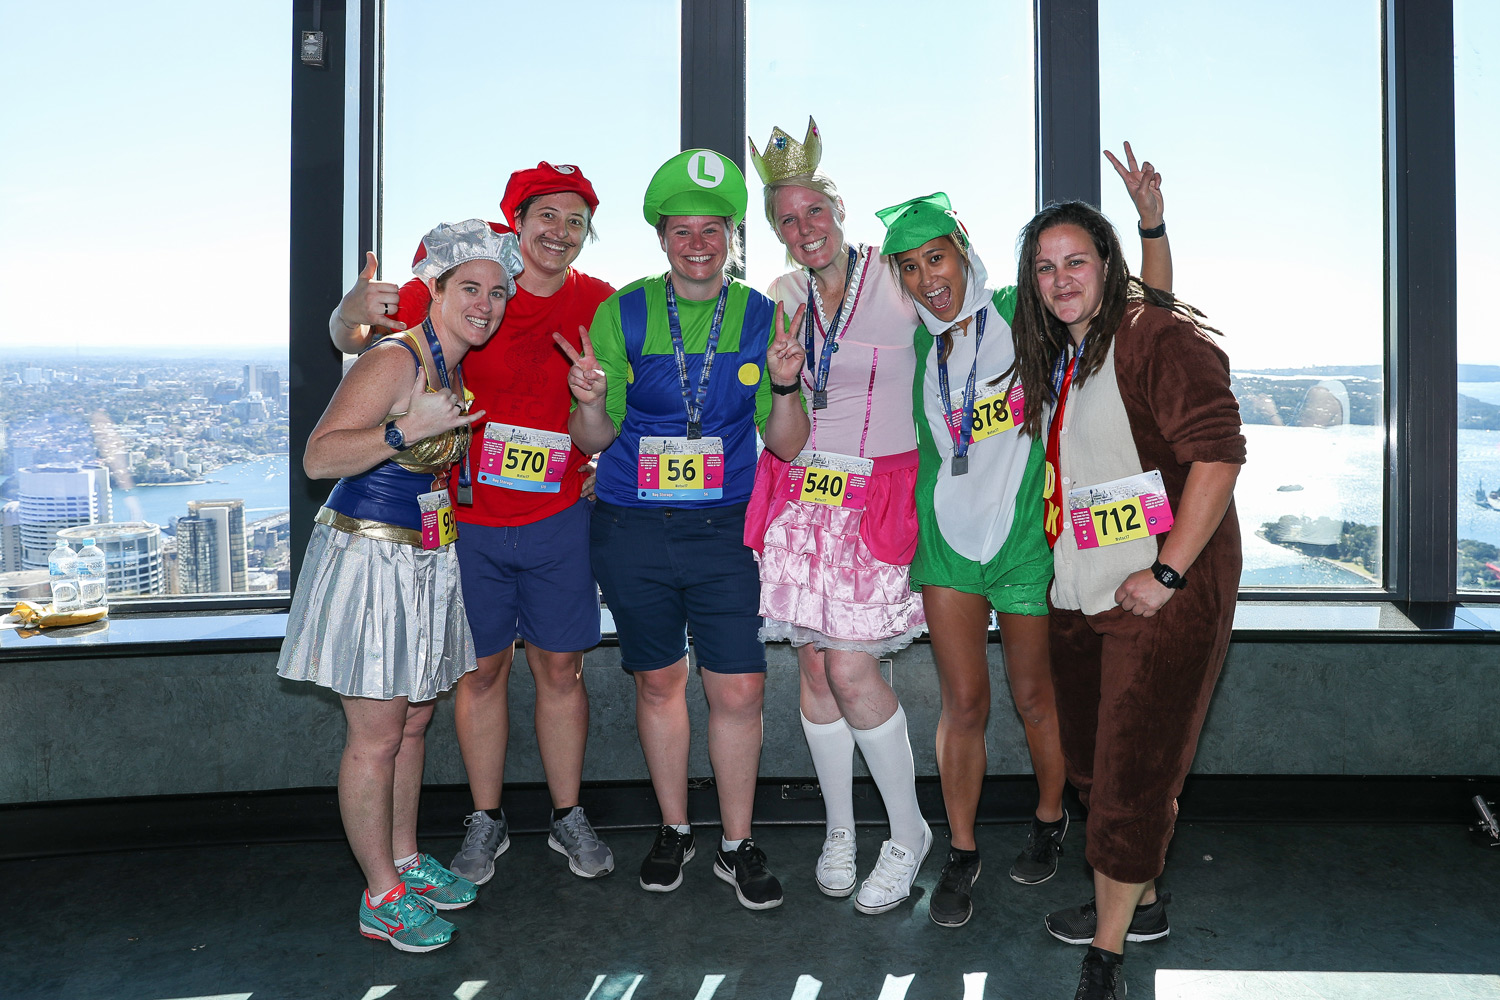 Some of the fun at the Sydney Tower Stair Challenge to raise money for charity.